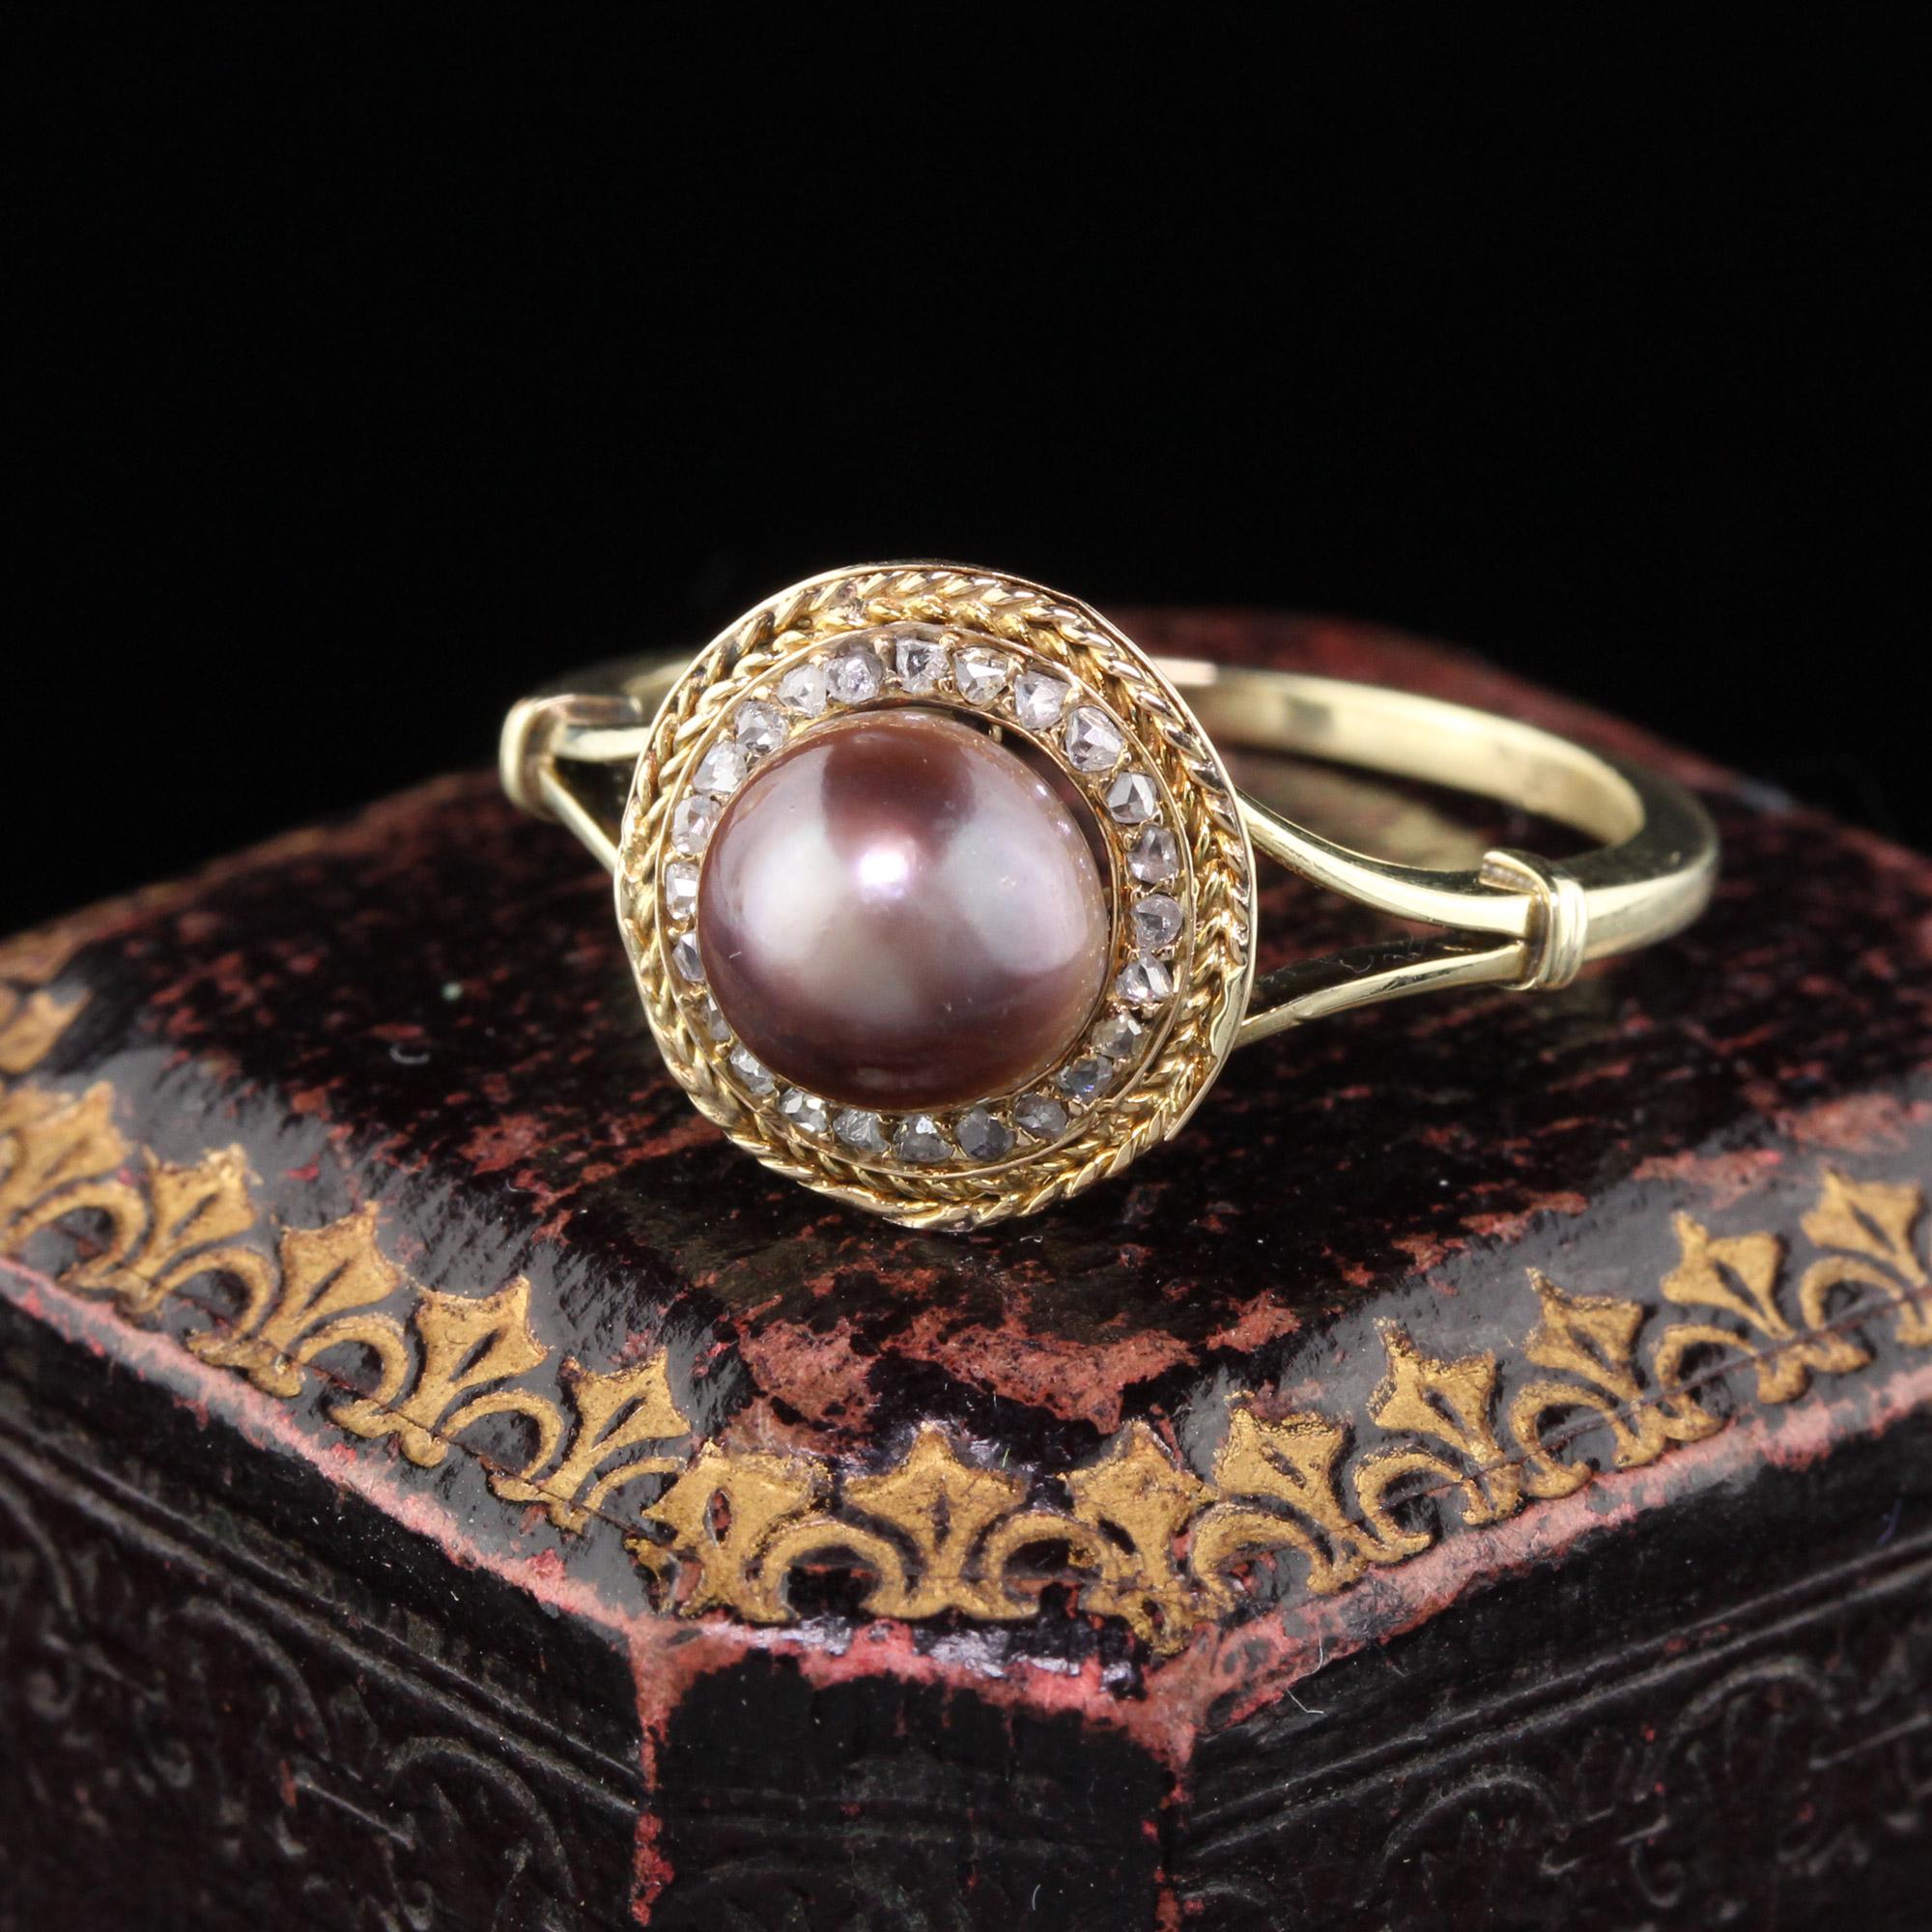 Beautiful & delicate Vintage 18K Yellow Gold, Natural Pearl & Rose Cut Diamond Ring with a Hallmark from the Netherlands. The center pearl is a ombre going from a light to darker browish color with hints of purple.

#R0276

Metal: 18K Yellow Gold